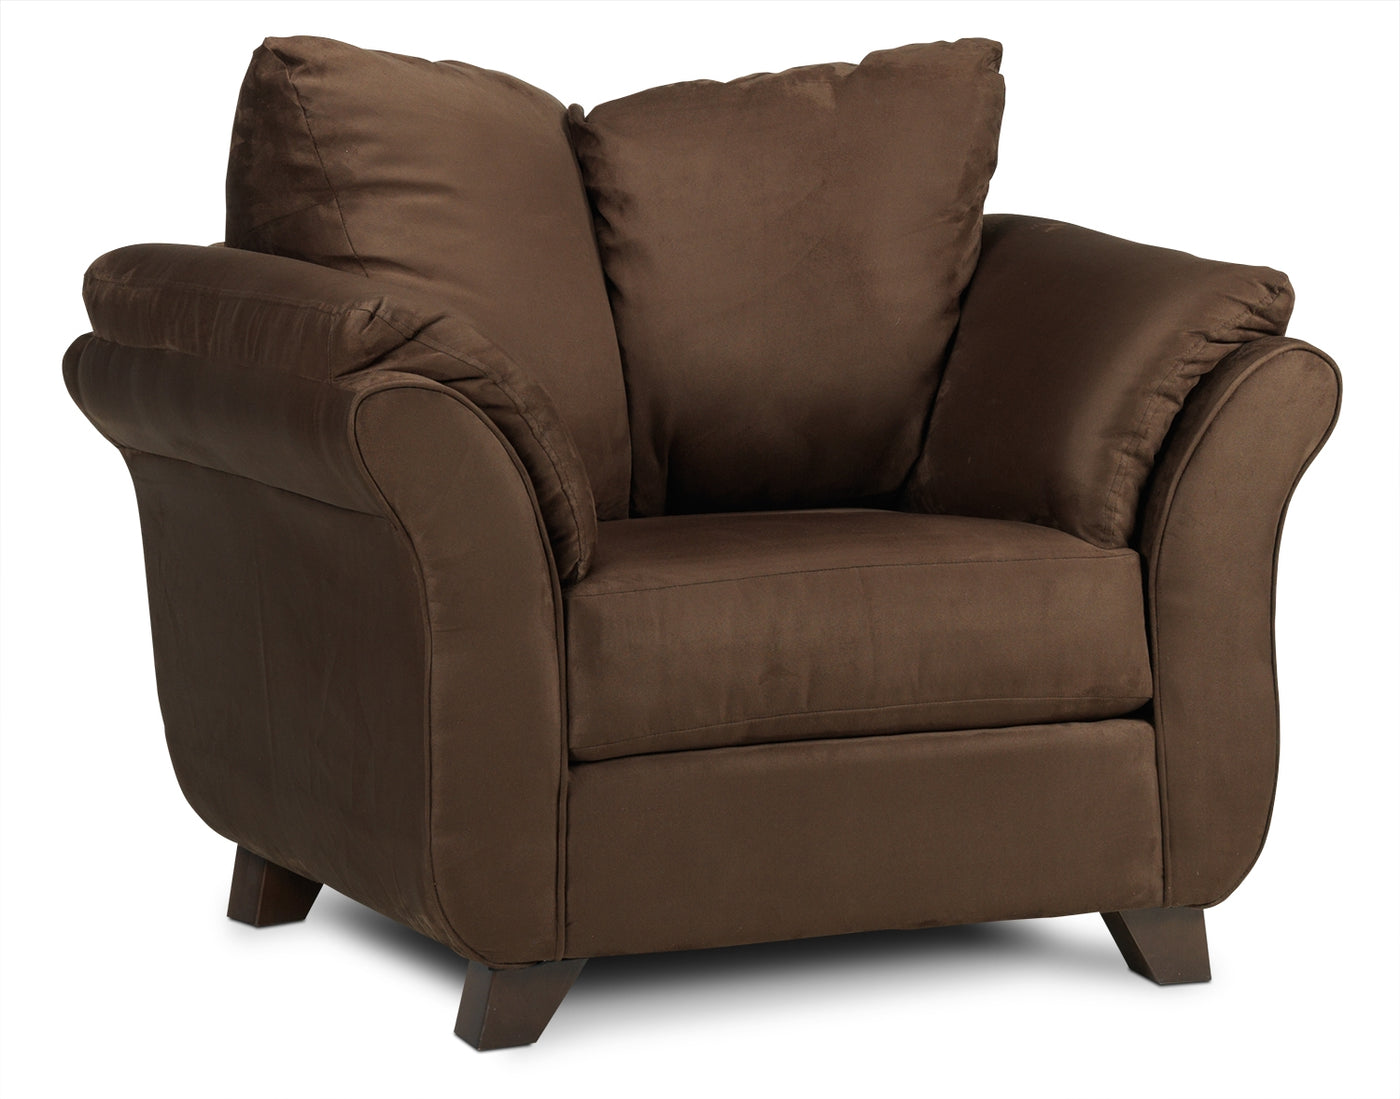 Collier Sofa, Loveseat and Chair Set - Chocolate